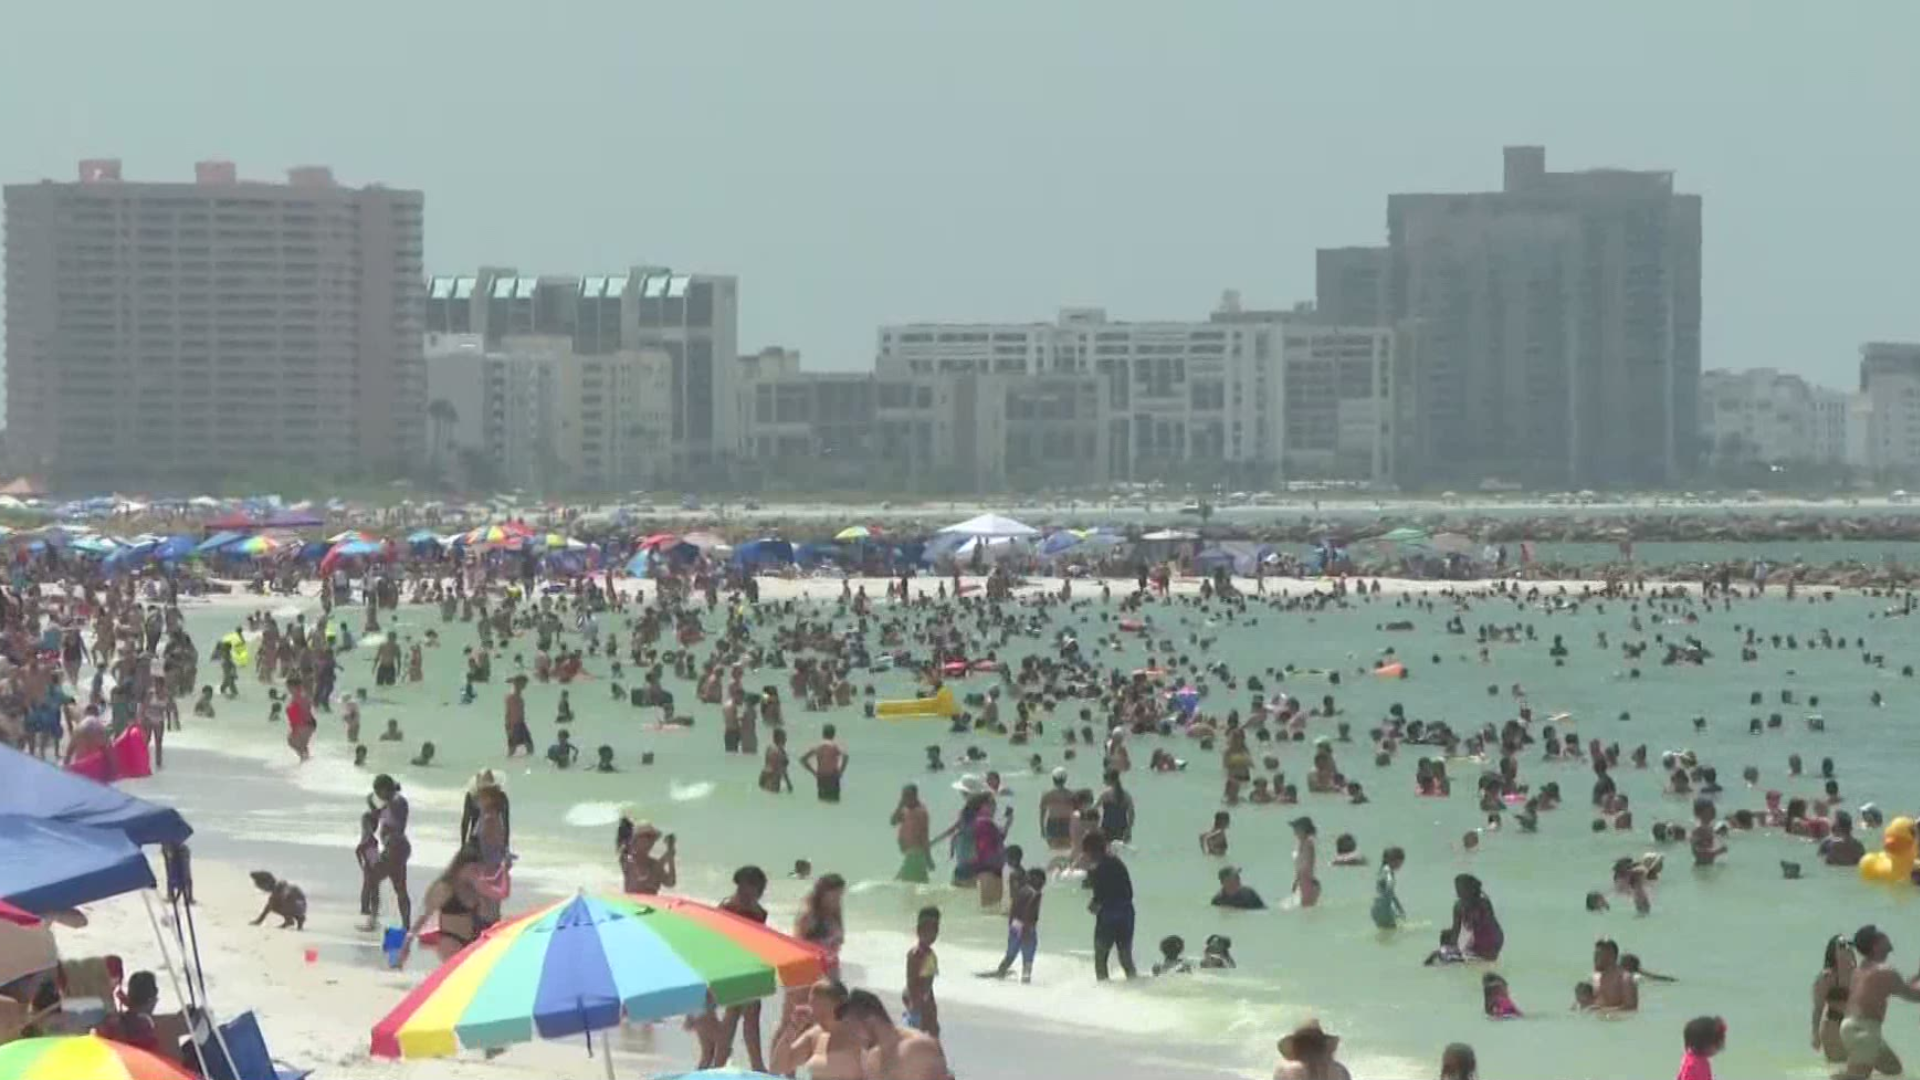 Even outdoors, congested spaces can lead to transmissions, and beach goers that congregate inside could face issues as well.